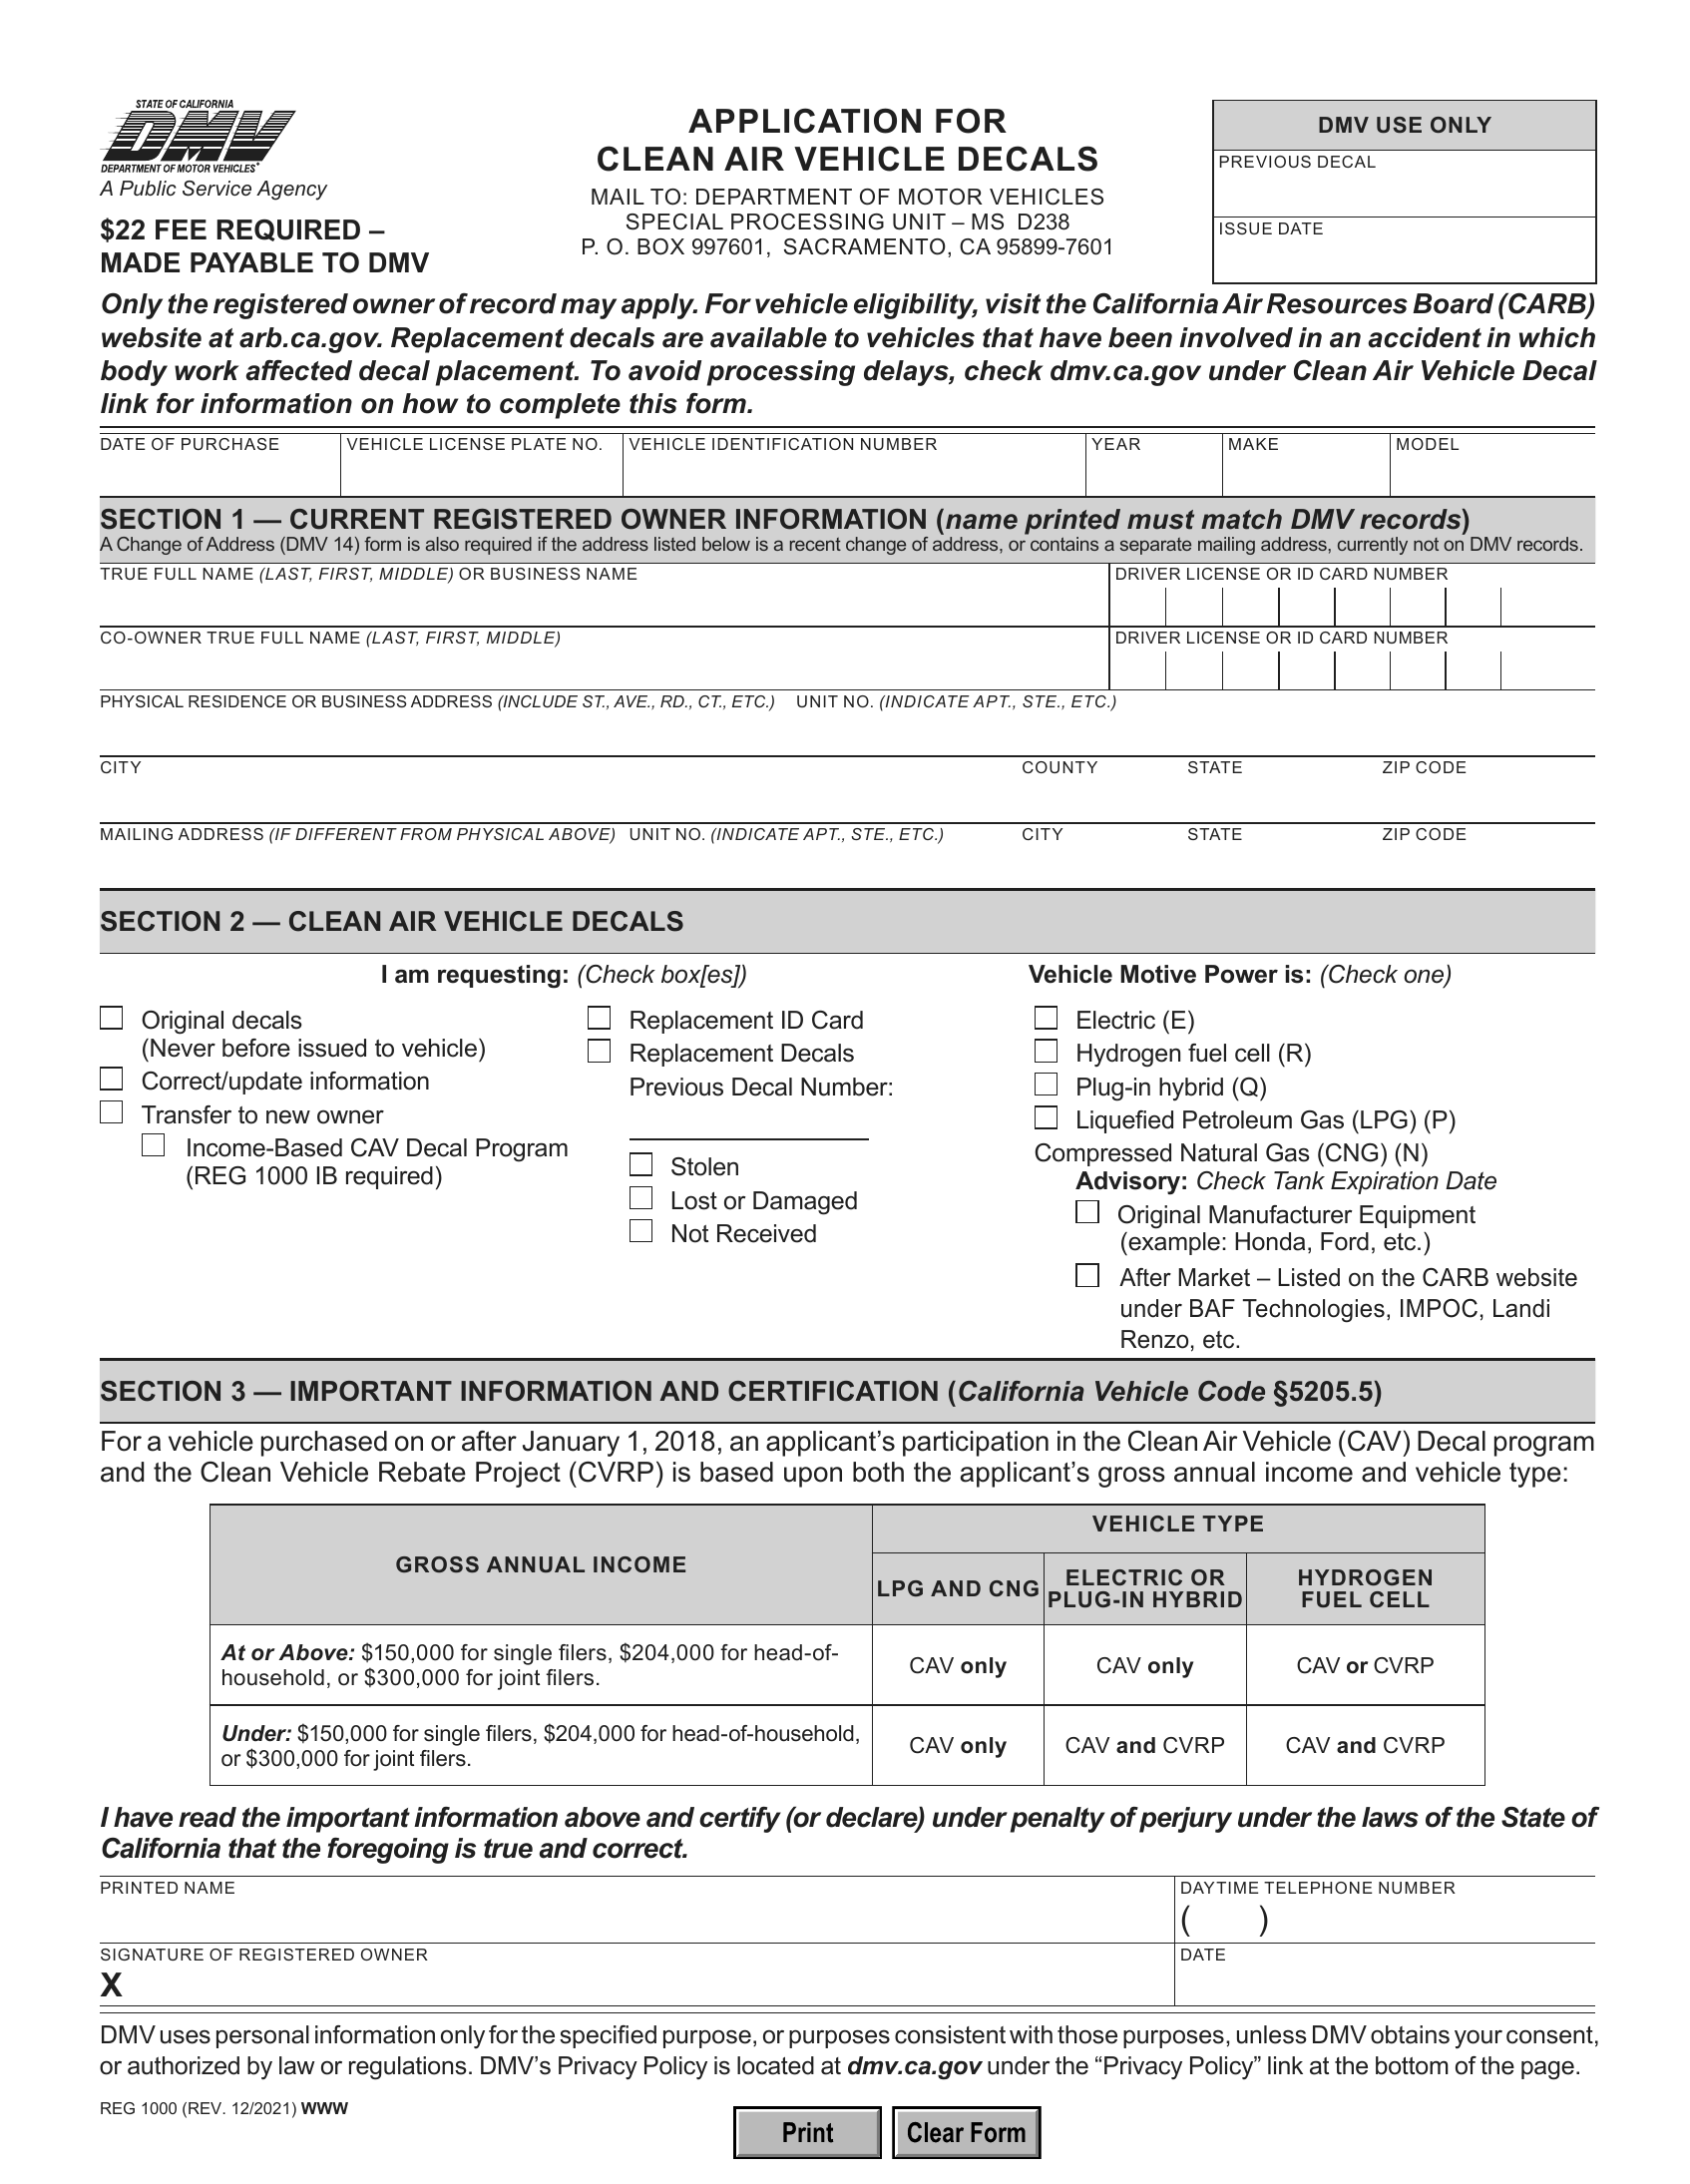 ca-dmv-form-reg-1000-application-for-clean-air-vehicle-decals-forms